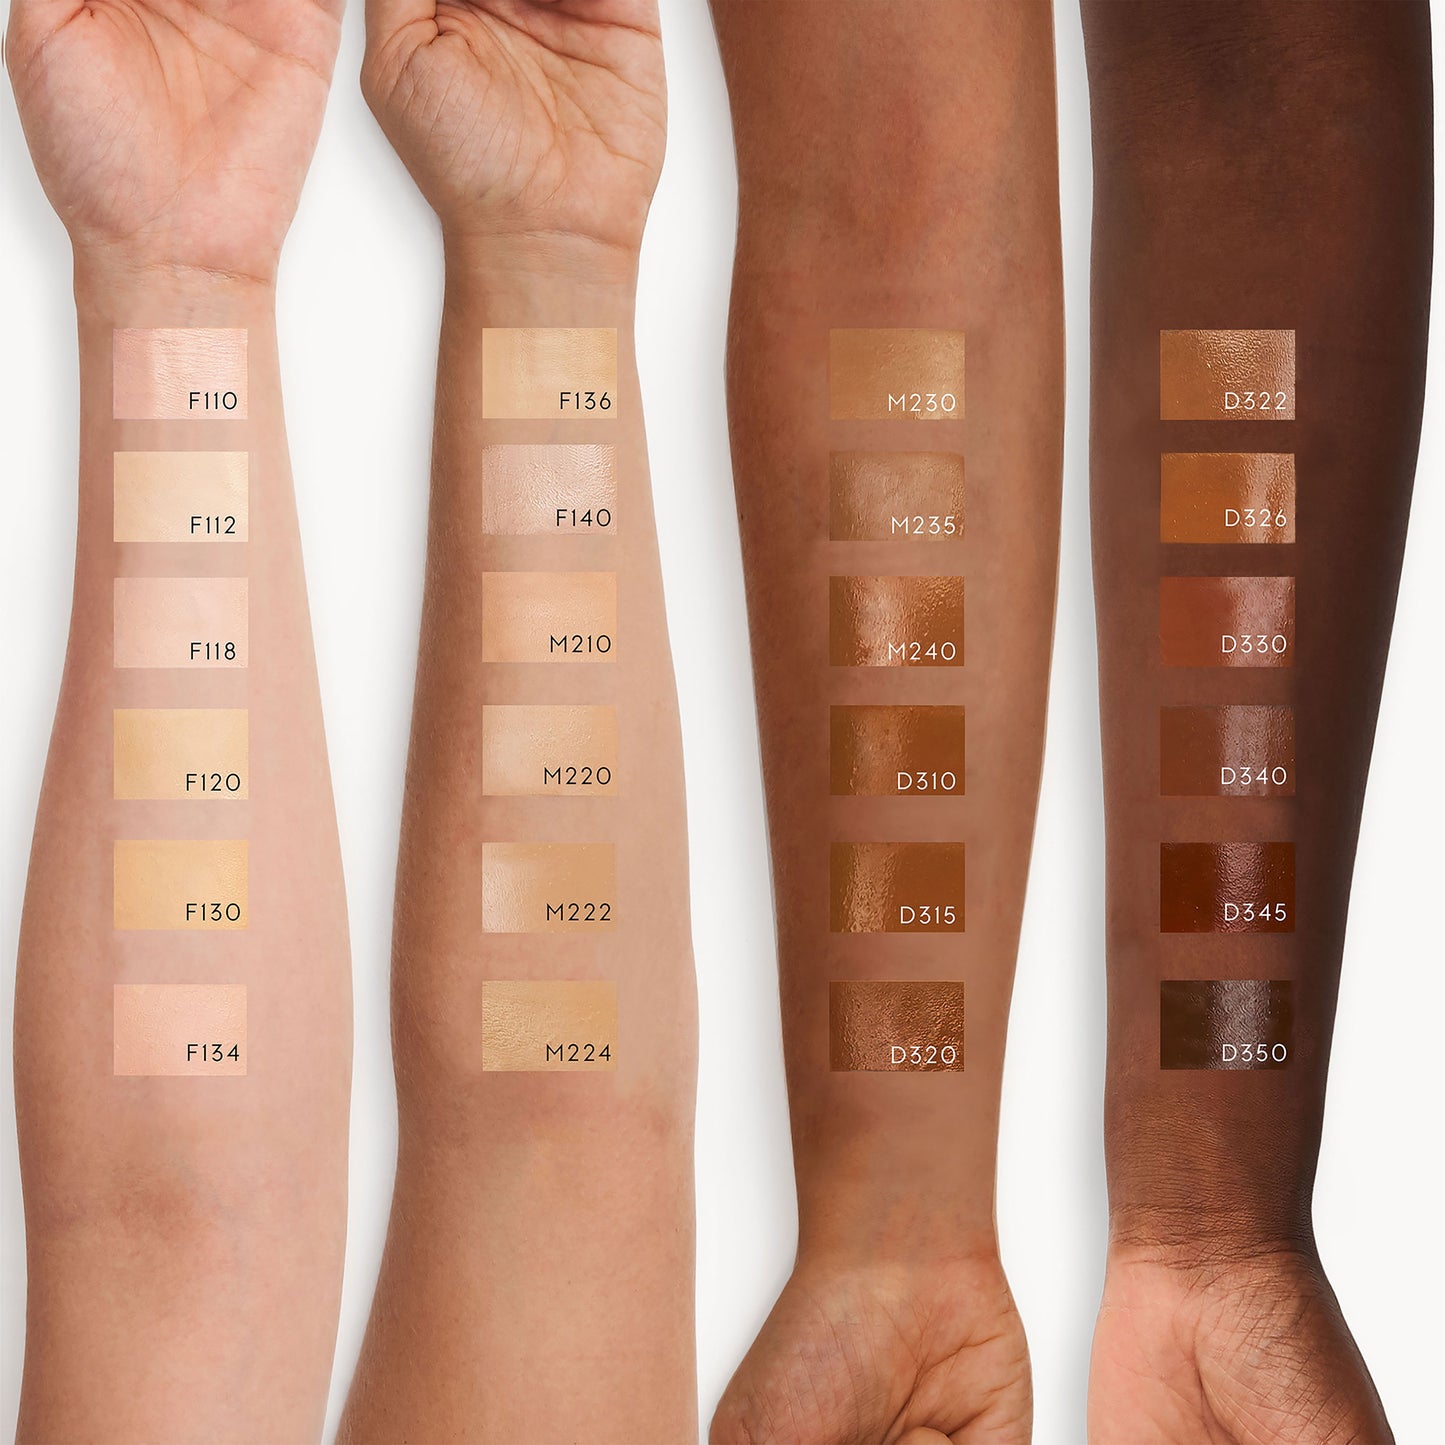 Four arms of different skin tones all with a swatch of cream foundation from darkest to lightest shade. D326 is the second-lightest shade on the deepest skin tone.  